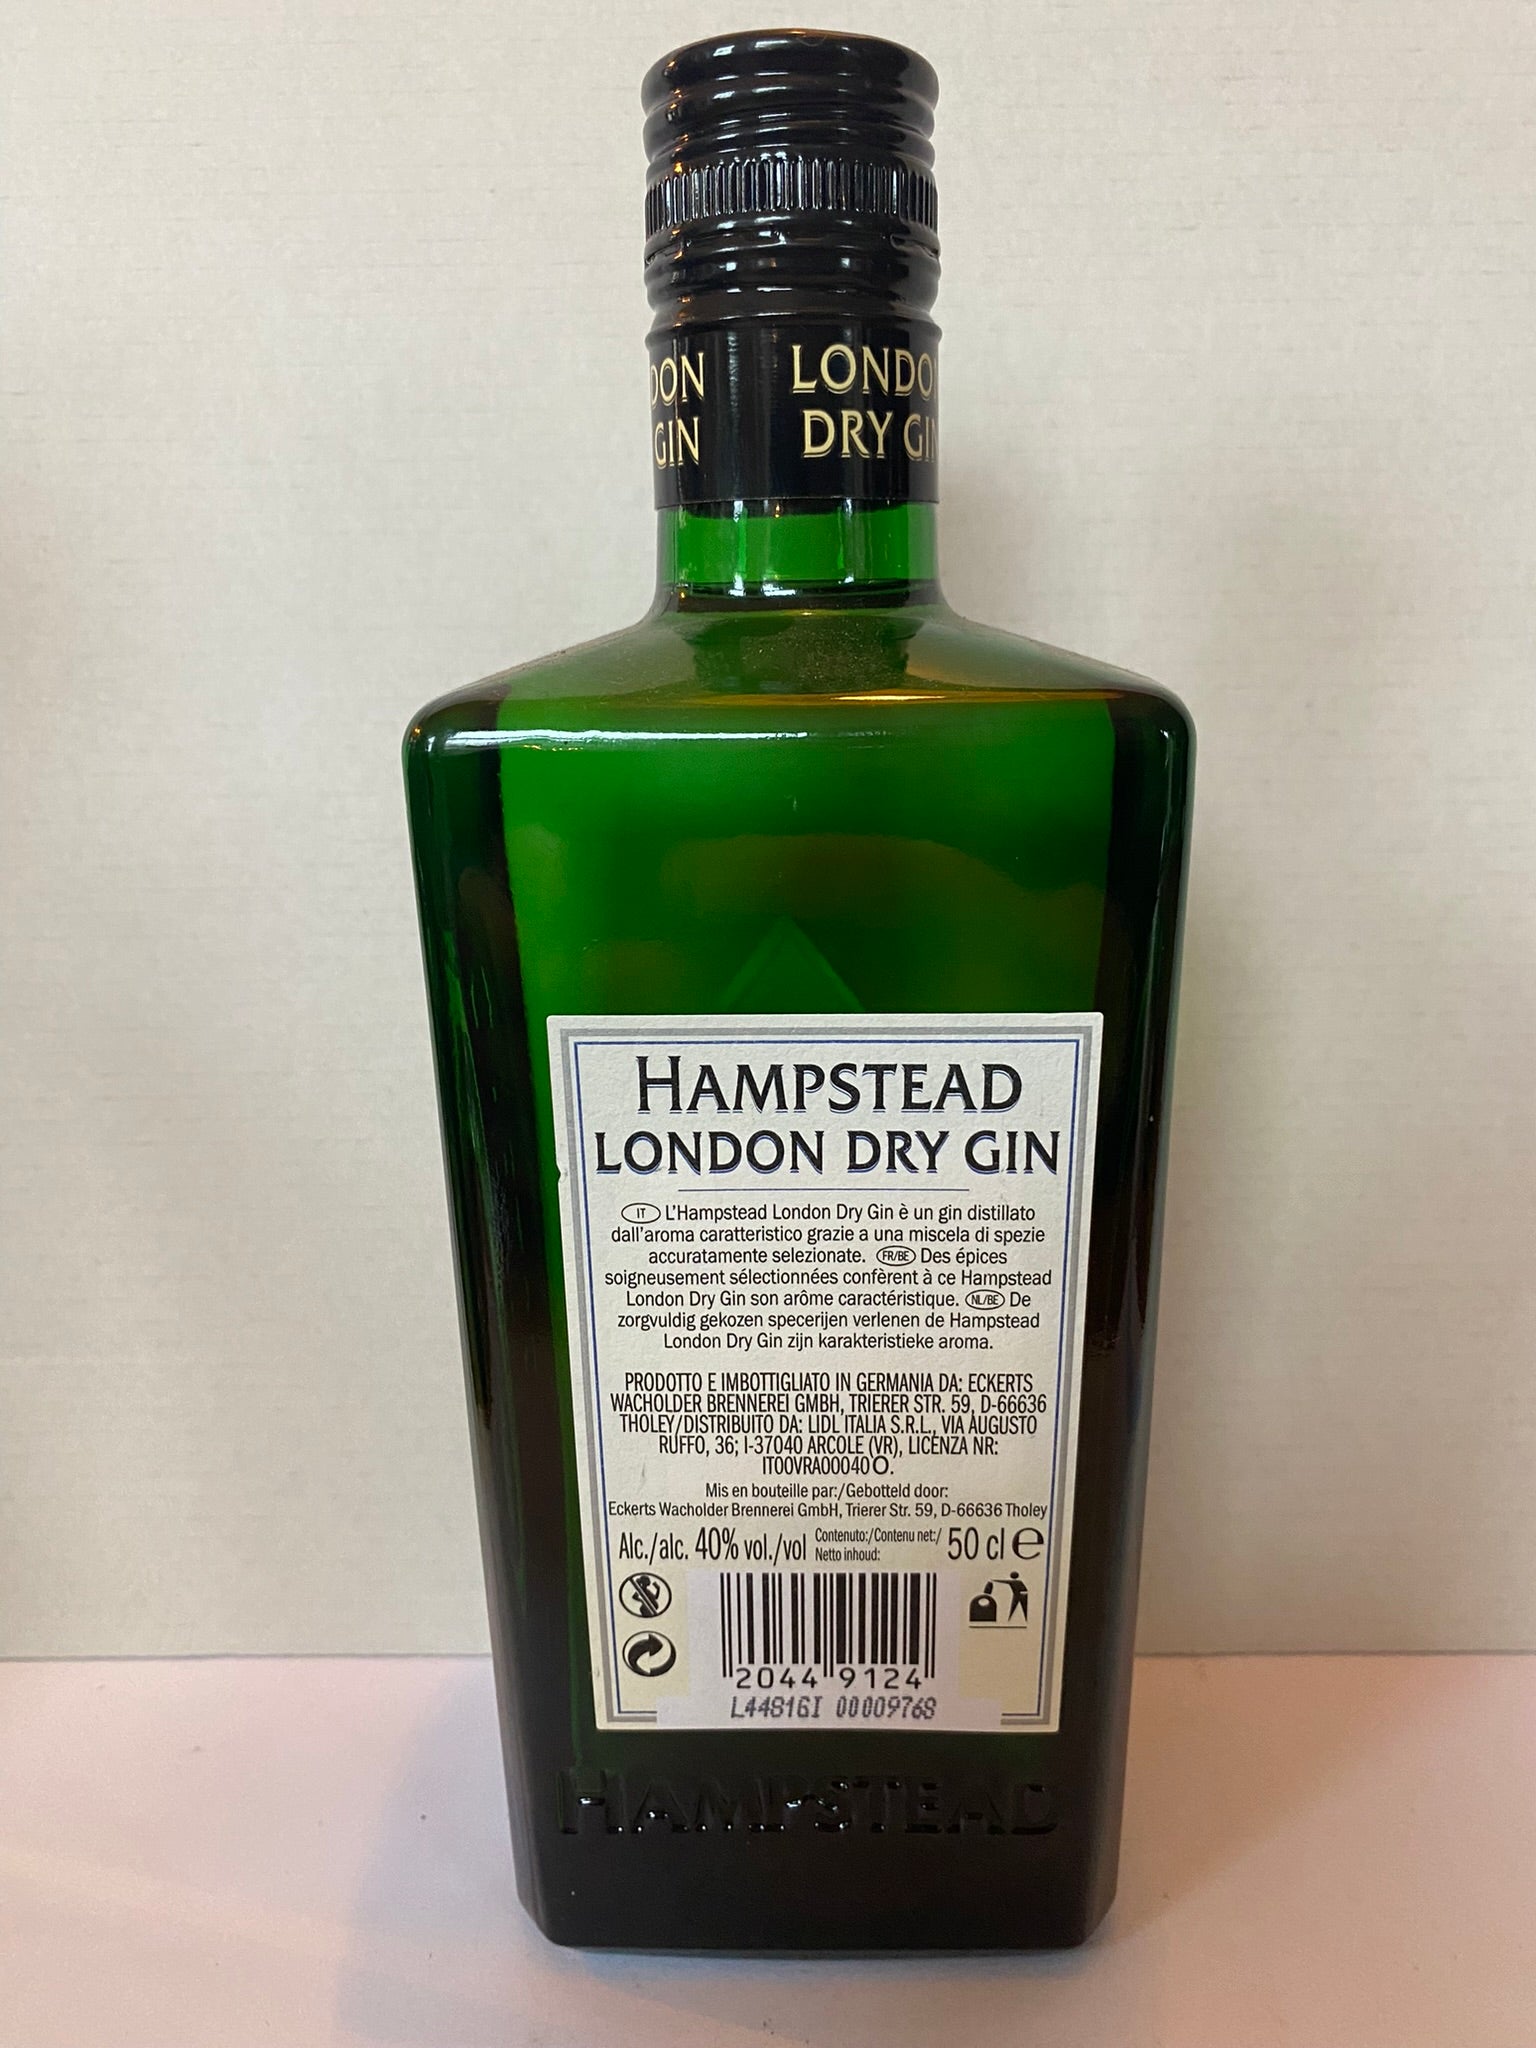 House of London Gin Hampstead Gin – Dry